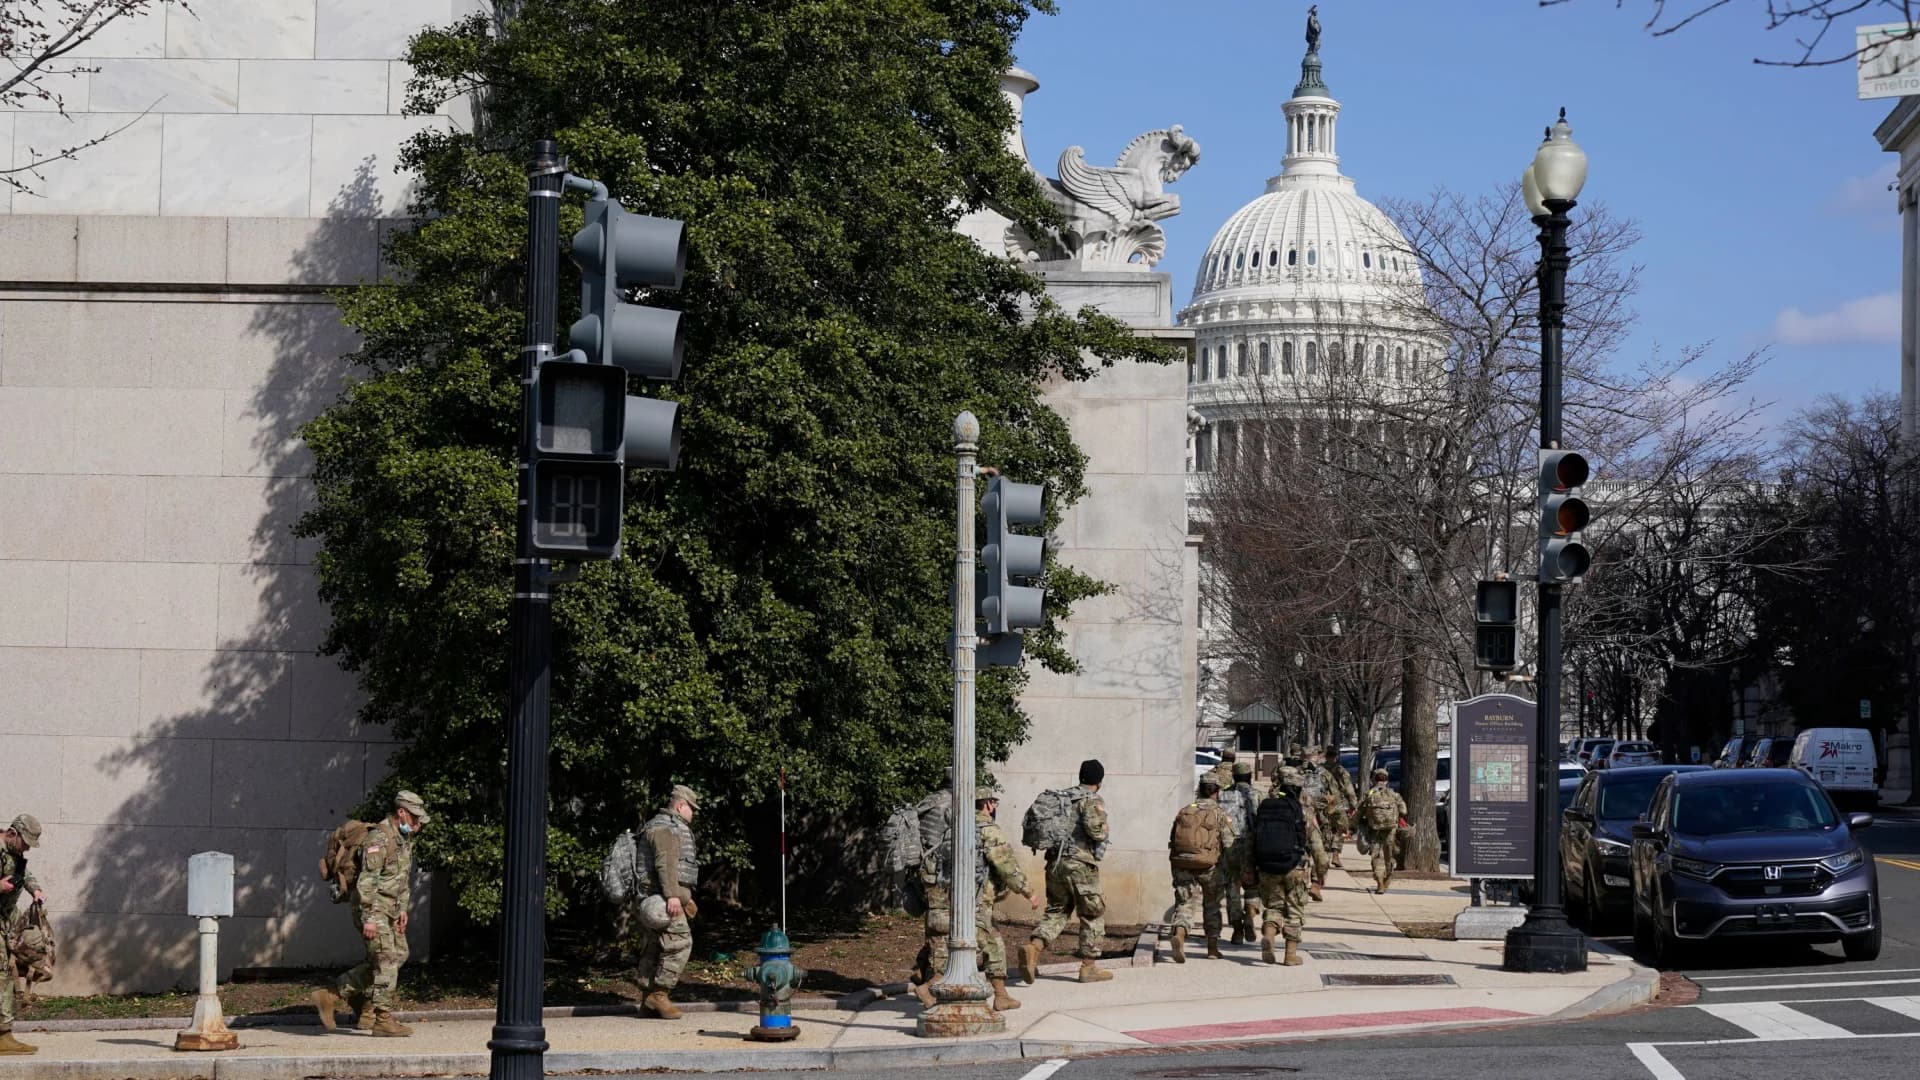 Police request 60-day extension of Guard at US Capitol